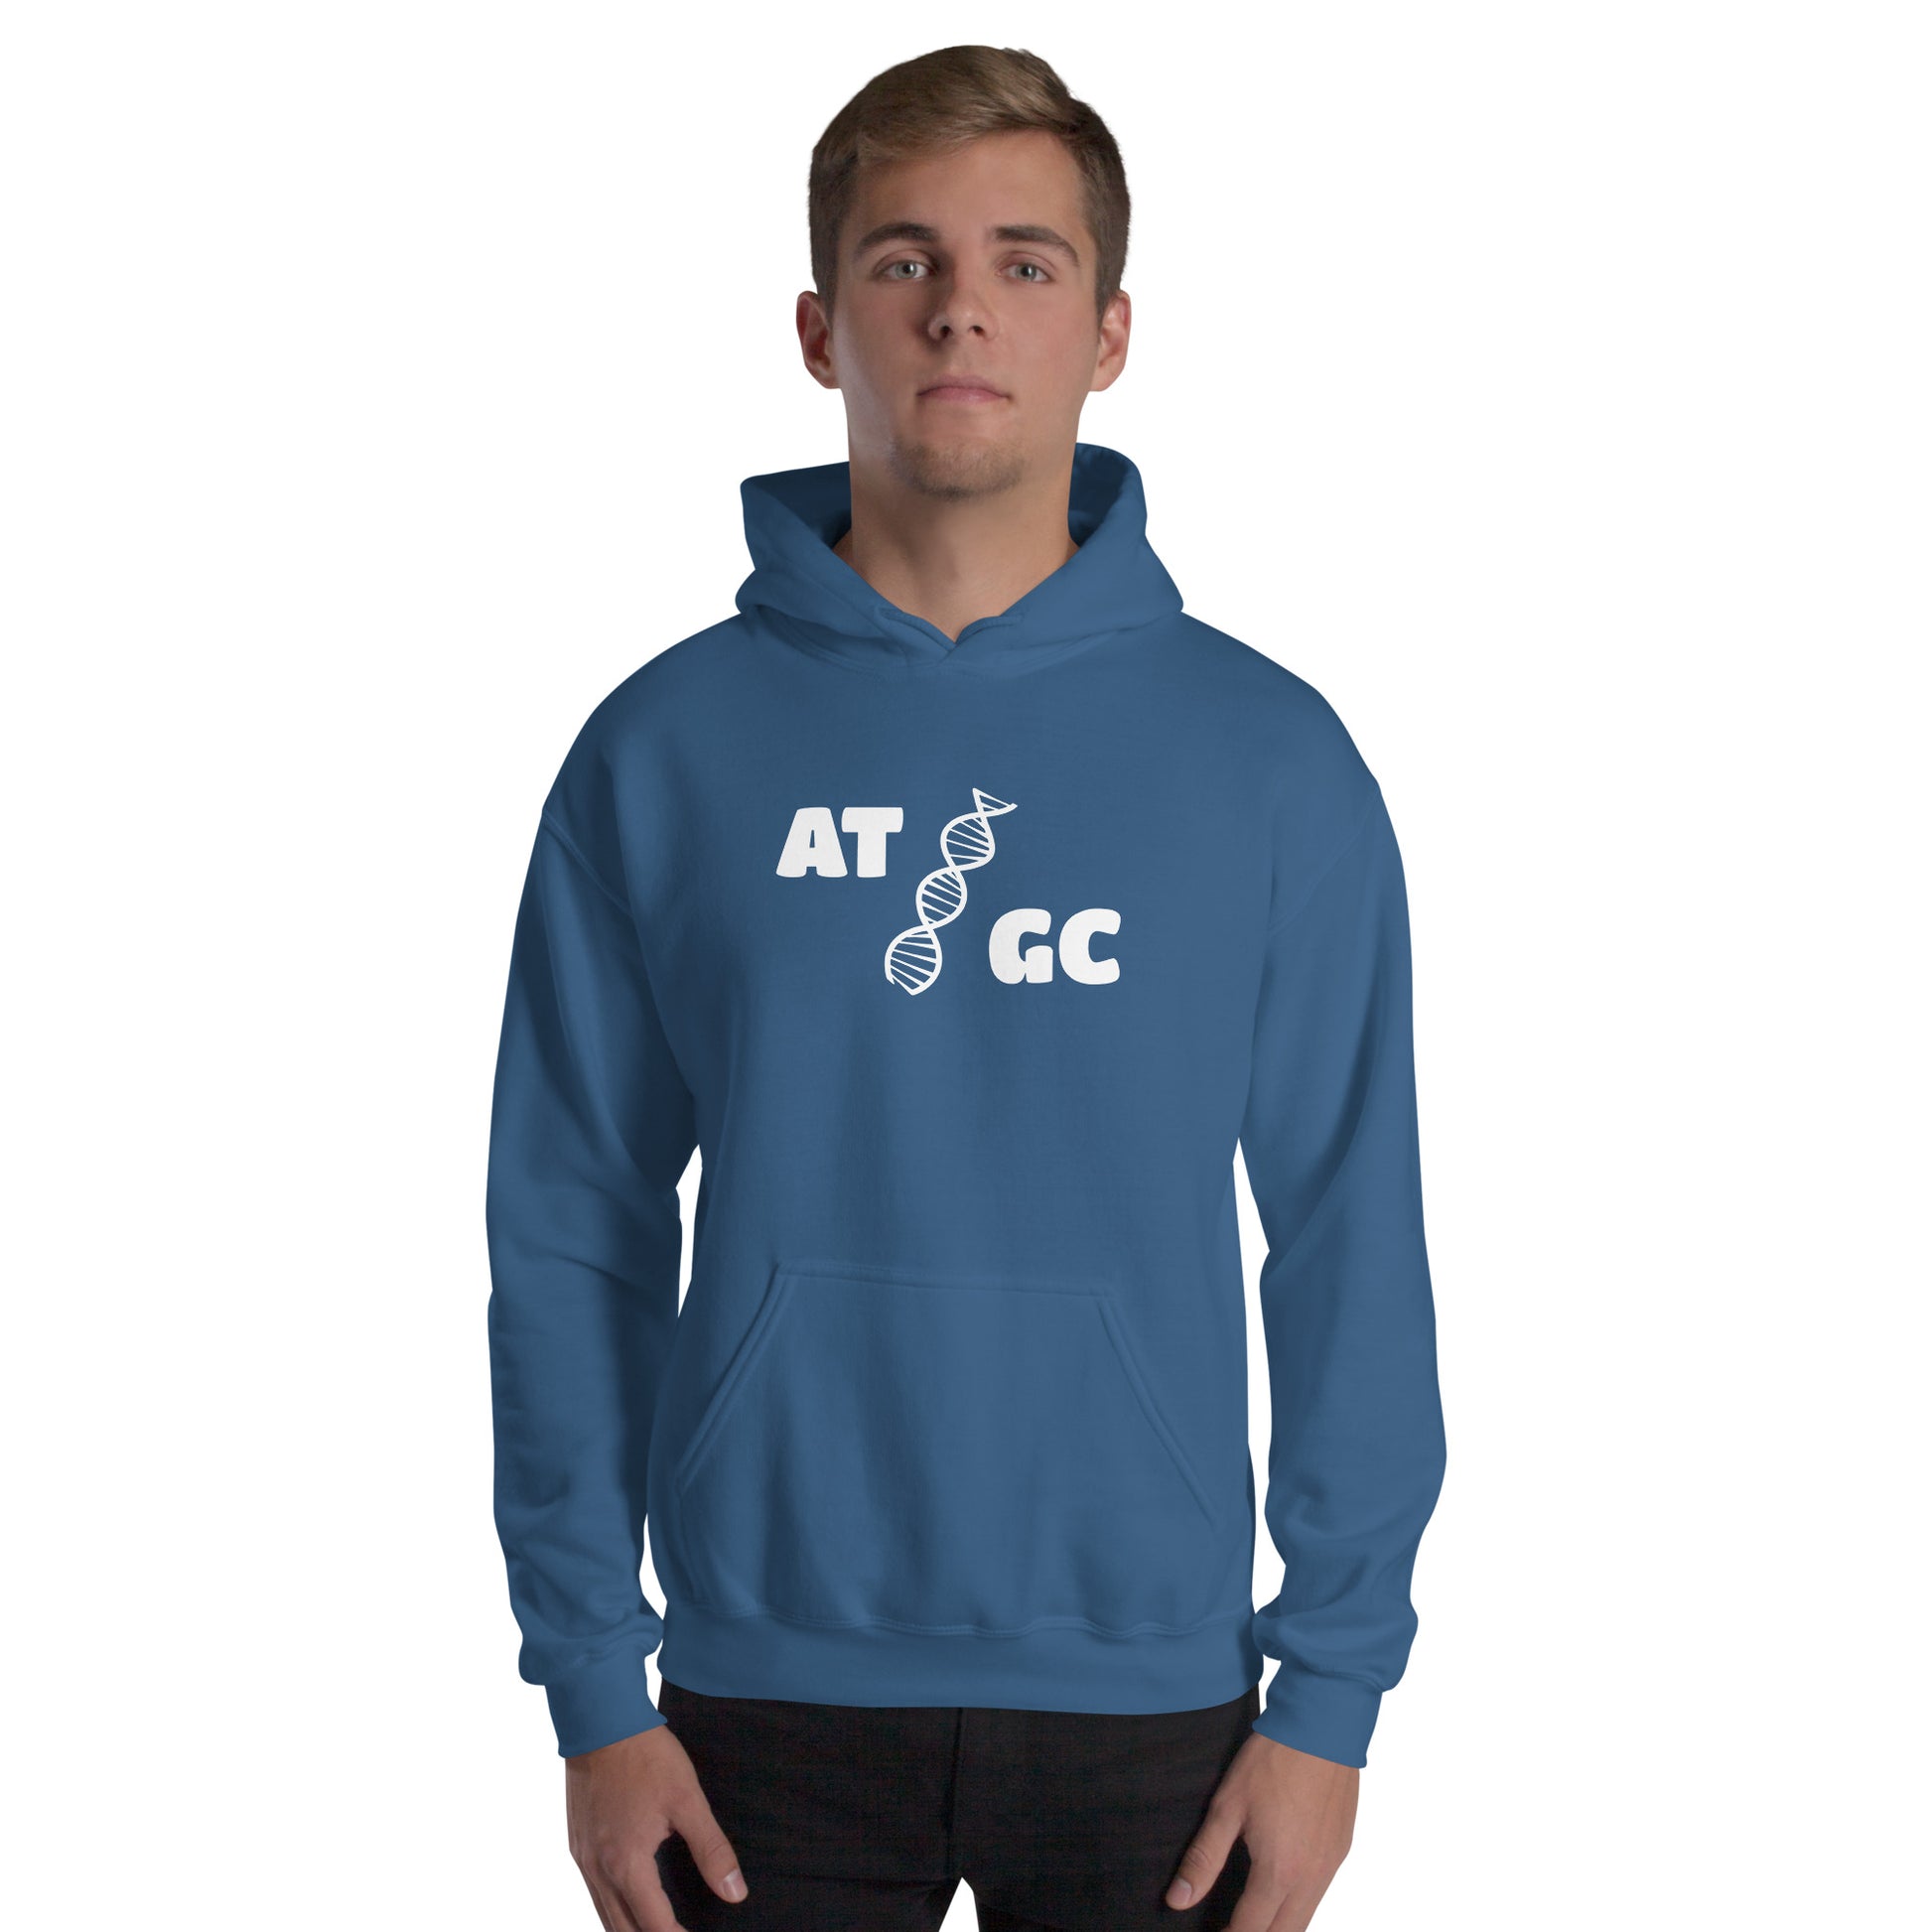 Men with indigo blue hoodie with image of a DNA string and the text "ATGC"